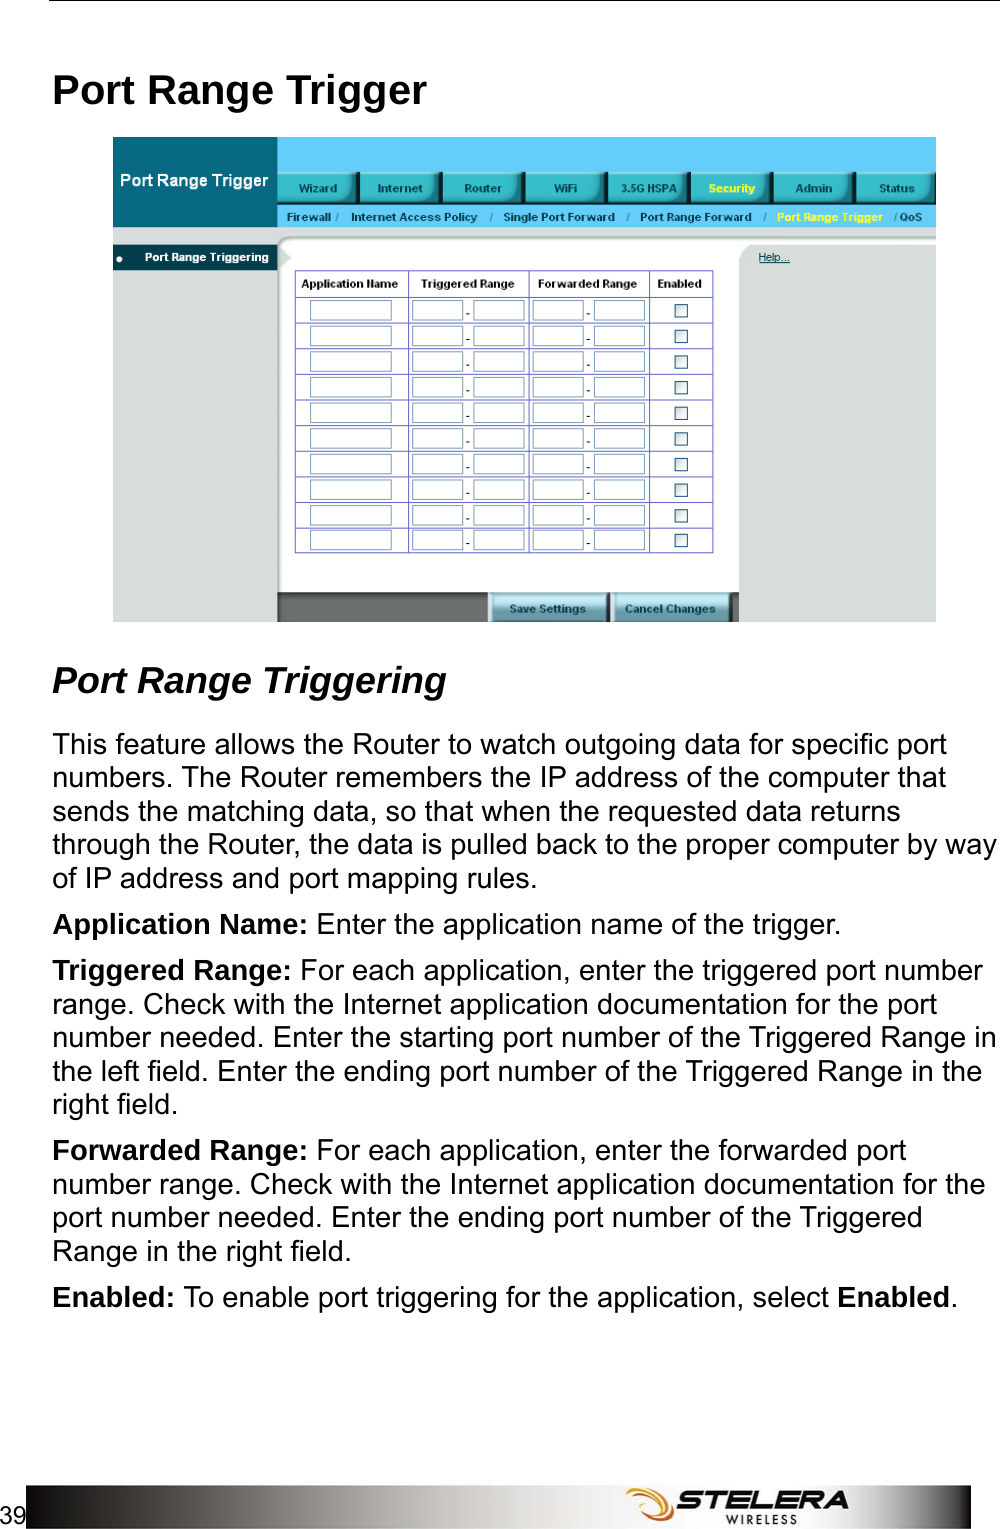  Security Setup 39  Port Range Trigger  Port Range Triggering This feature allows the Router to watch outgoing data for specific port numbers. The Router remembers the IP address of the computer that sends the matching data, so that when the requested data returns through the Router, the data is pulled back to the proper computer by way of IP address and port mapping rules. Application Name: Enter the application name of the trigger. Triggered Range: For each application, enter the triggered port number range. Check with the Internet application documentation for the port number needed. Enter the starting port number of the Triggered Range in the left field. Enter the ending port number of the Triggered Range in the right field. Forwarded Range: For each application, enter the forwarded port number range. Check with the Internet application documentation for the port number needed. Enter the ending port number of the Triggered Range in the right field.   Enabled: To enable port triggering for the application, select Enabled. 